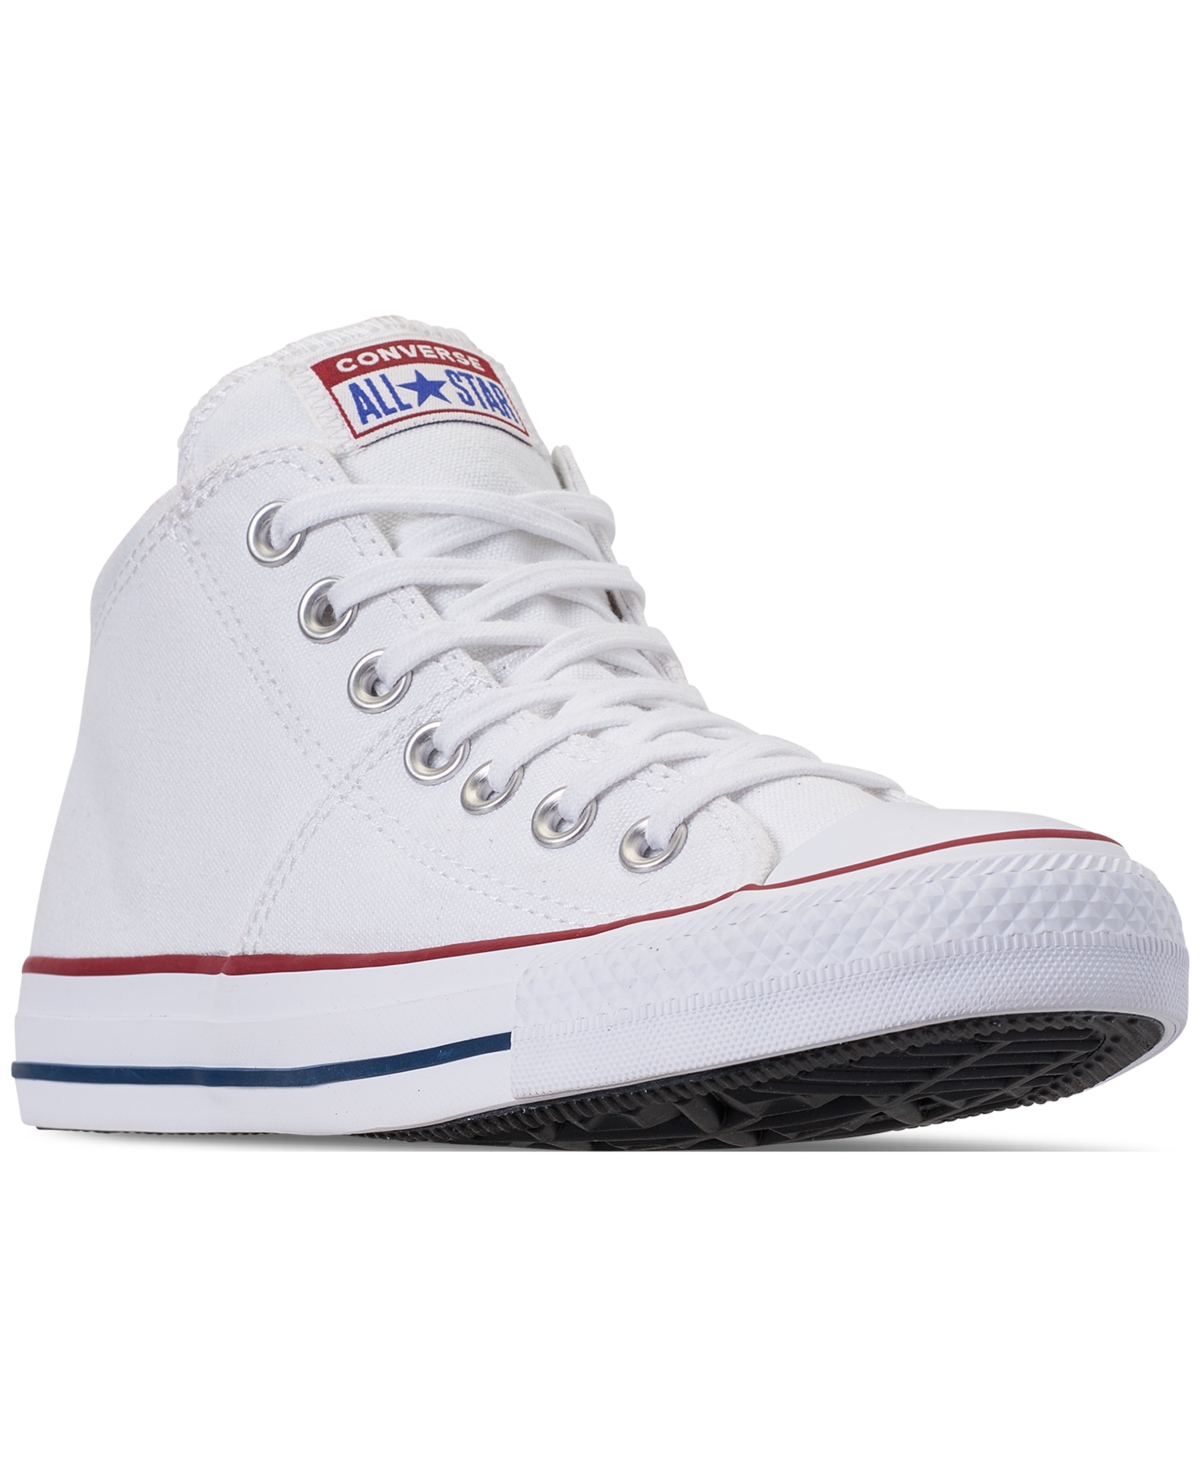 Converse Women's Chuck Taylor Madison Mid Casual Sneakers From Finish Line In White,white,white